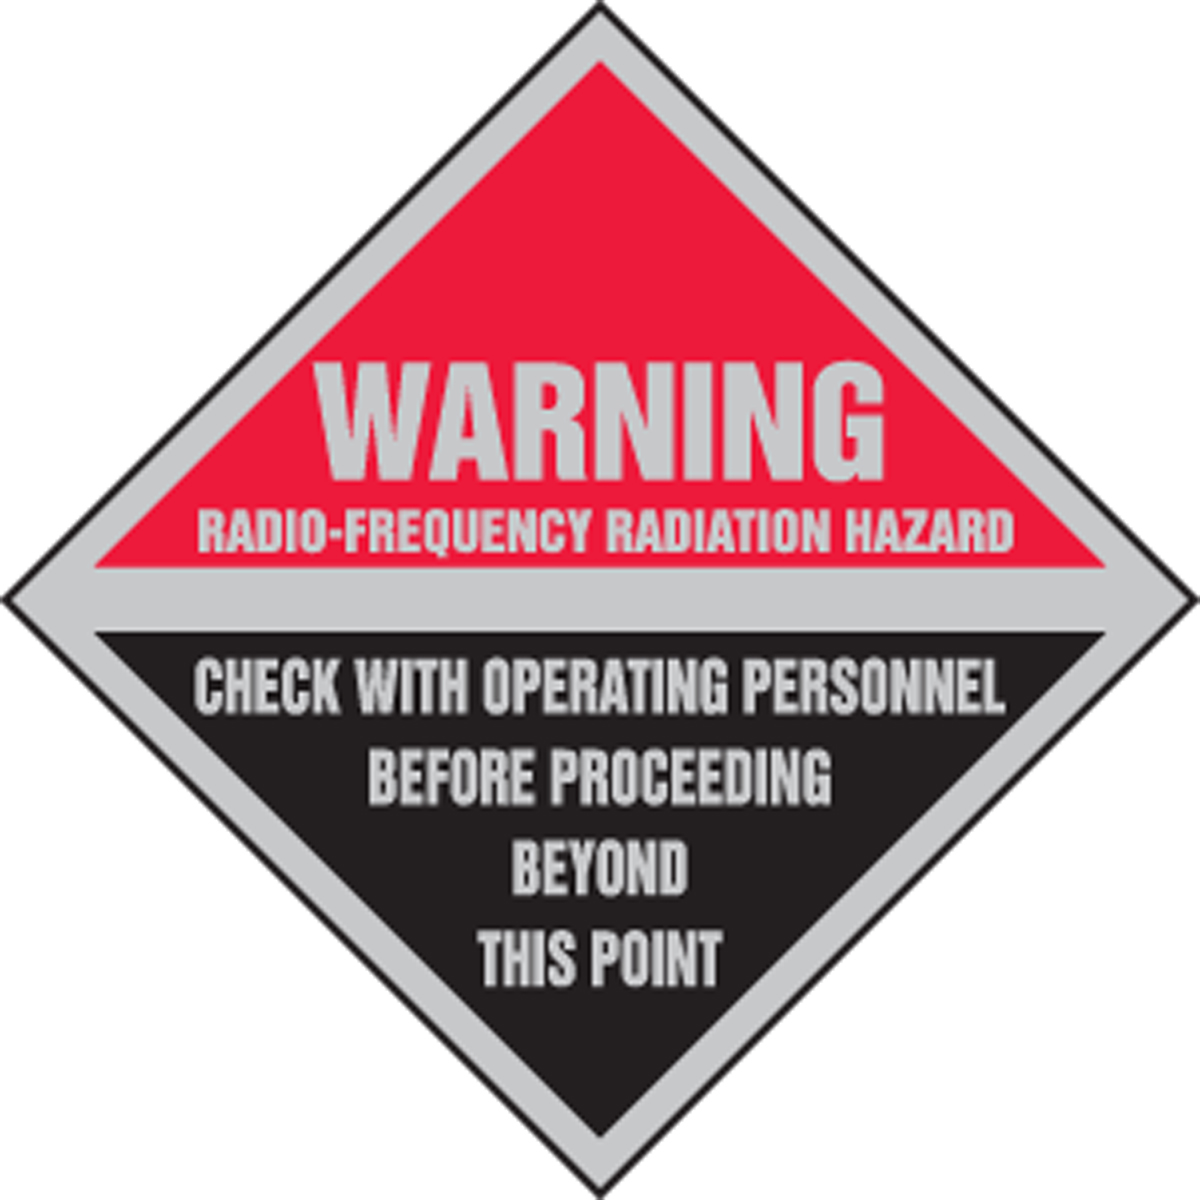 RADIO-FREQUENCY RADIATION HAZARD CHECK WITH OPERATING PERSONNEL BEFORE PROCEEDING BEYOND THIS POINT